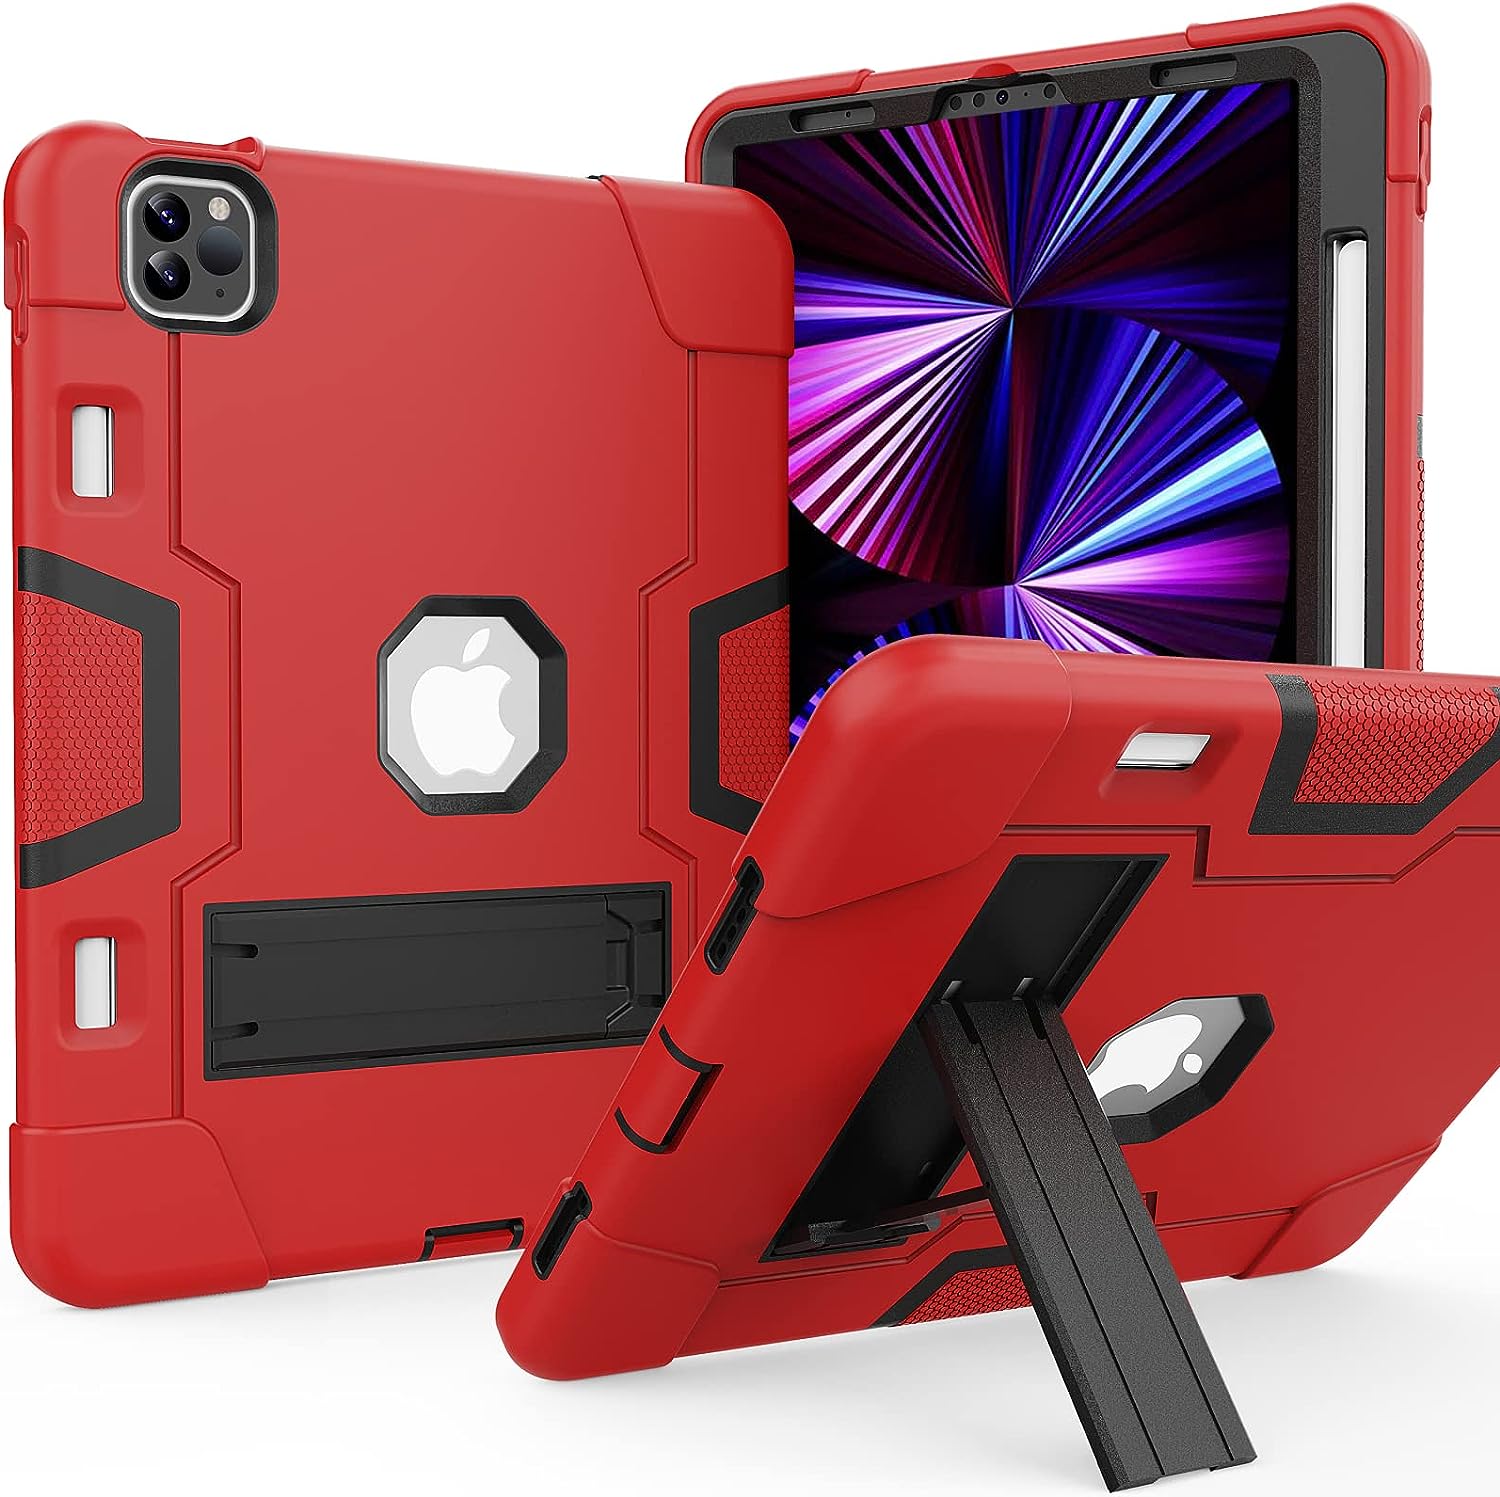 iPad Air 4th Generation 10.9 inch Case Red & Black with Kickstand RRP £10.83 CLEARANCE XL £7.99